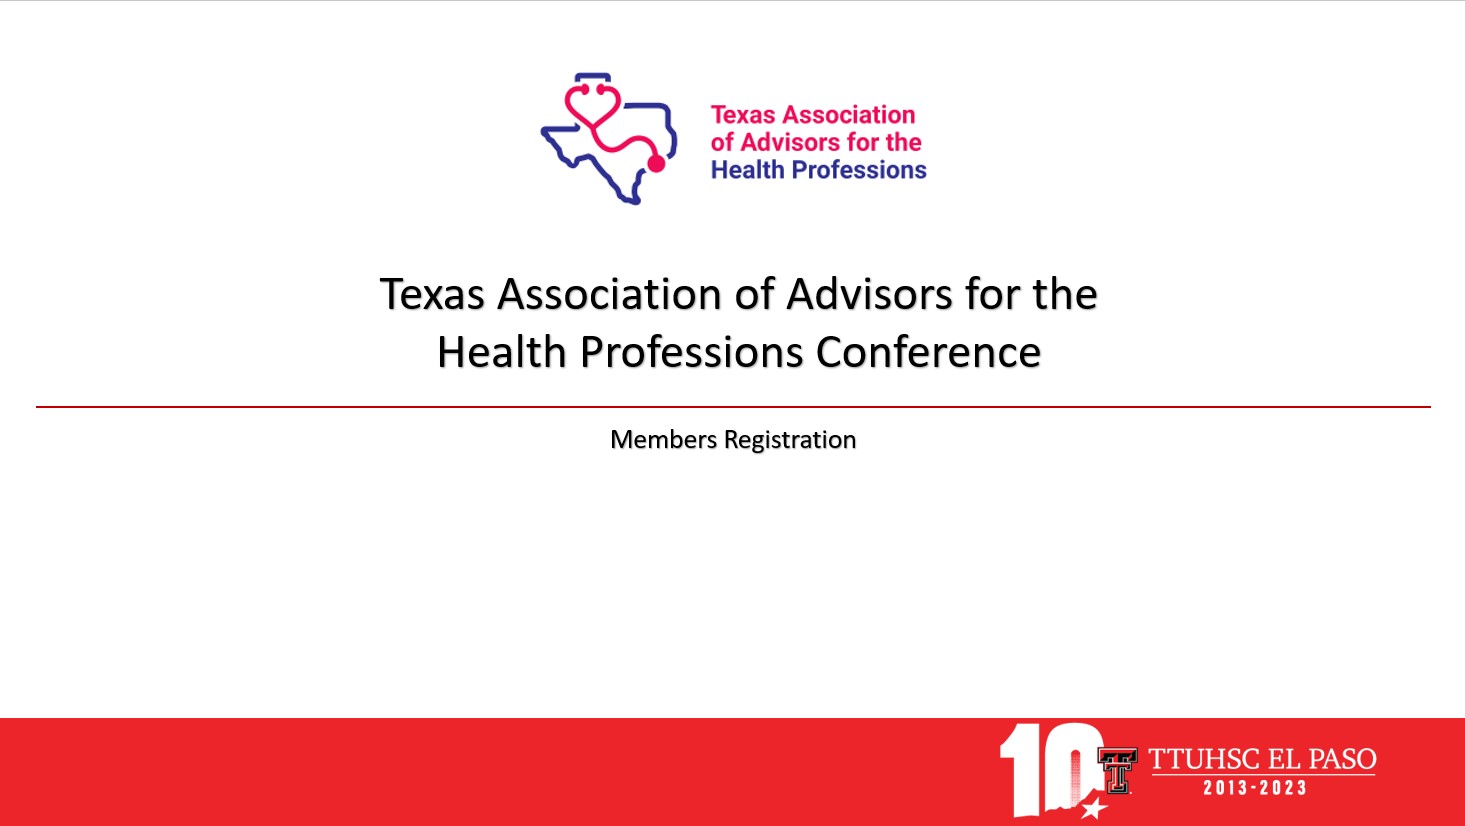 Texas Association of Advisors in the Health Professions Conference for Members